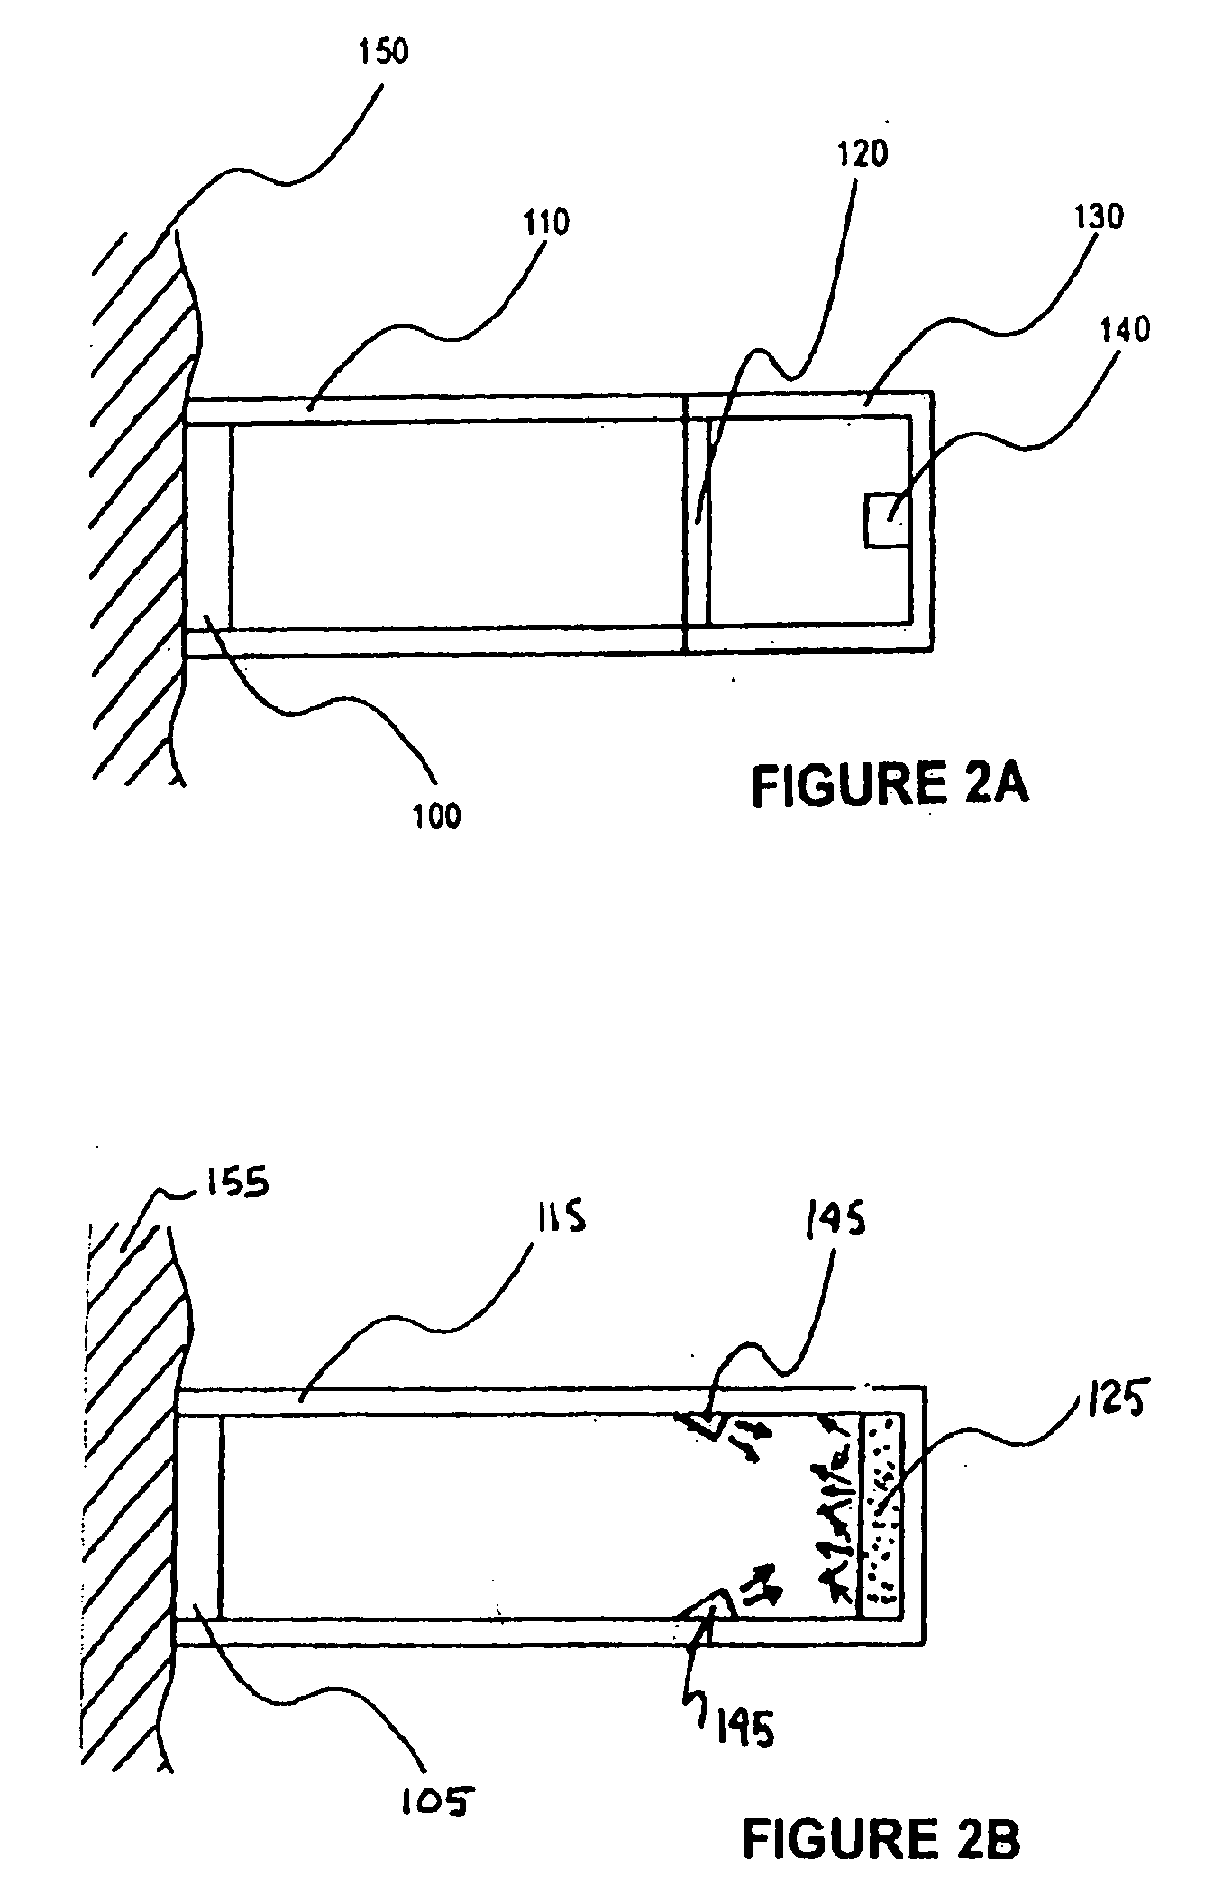 Self-contained, eye-safe hair-regrowth-inhibition apparatus and method